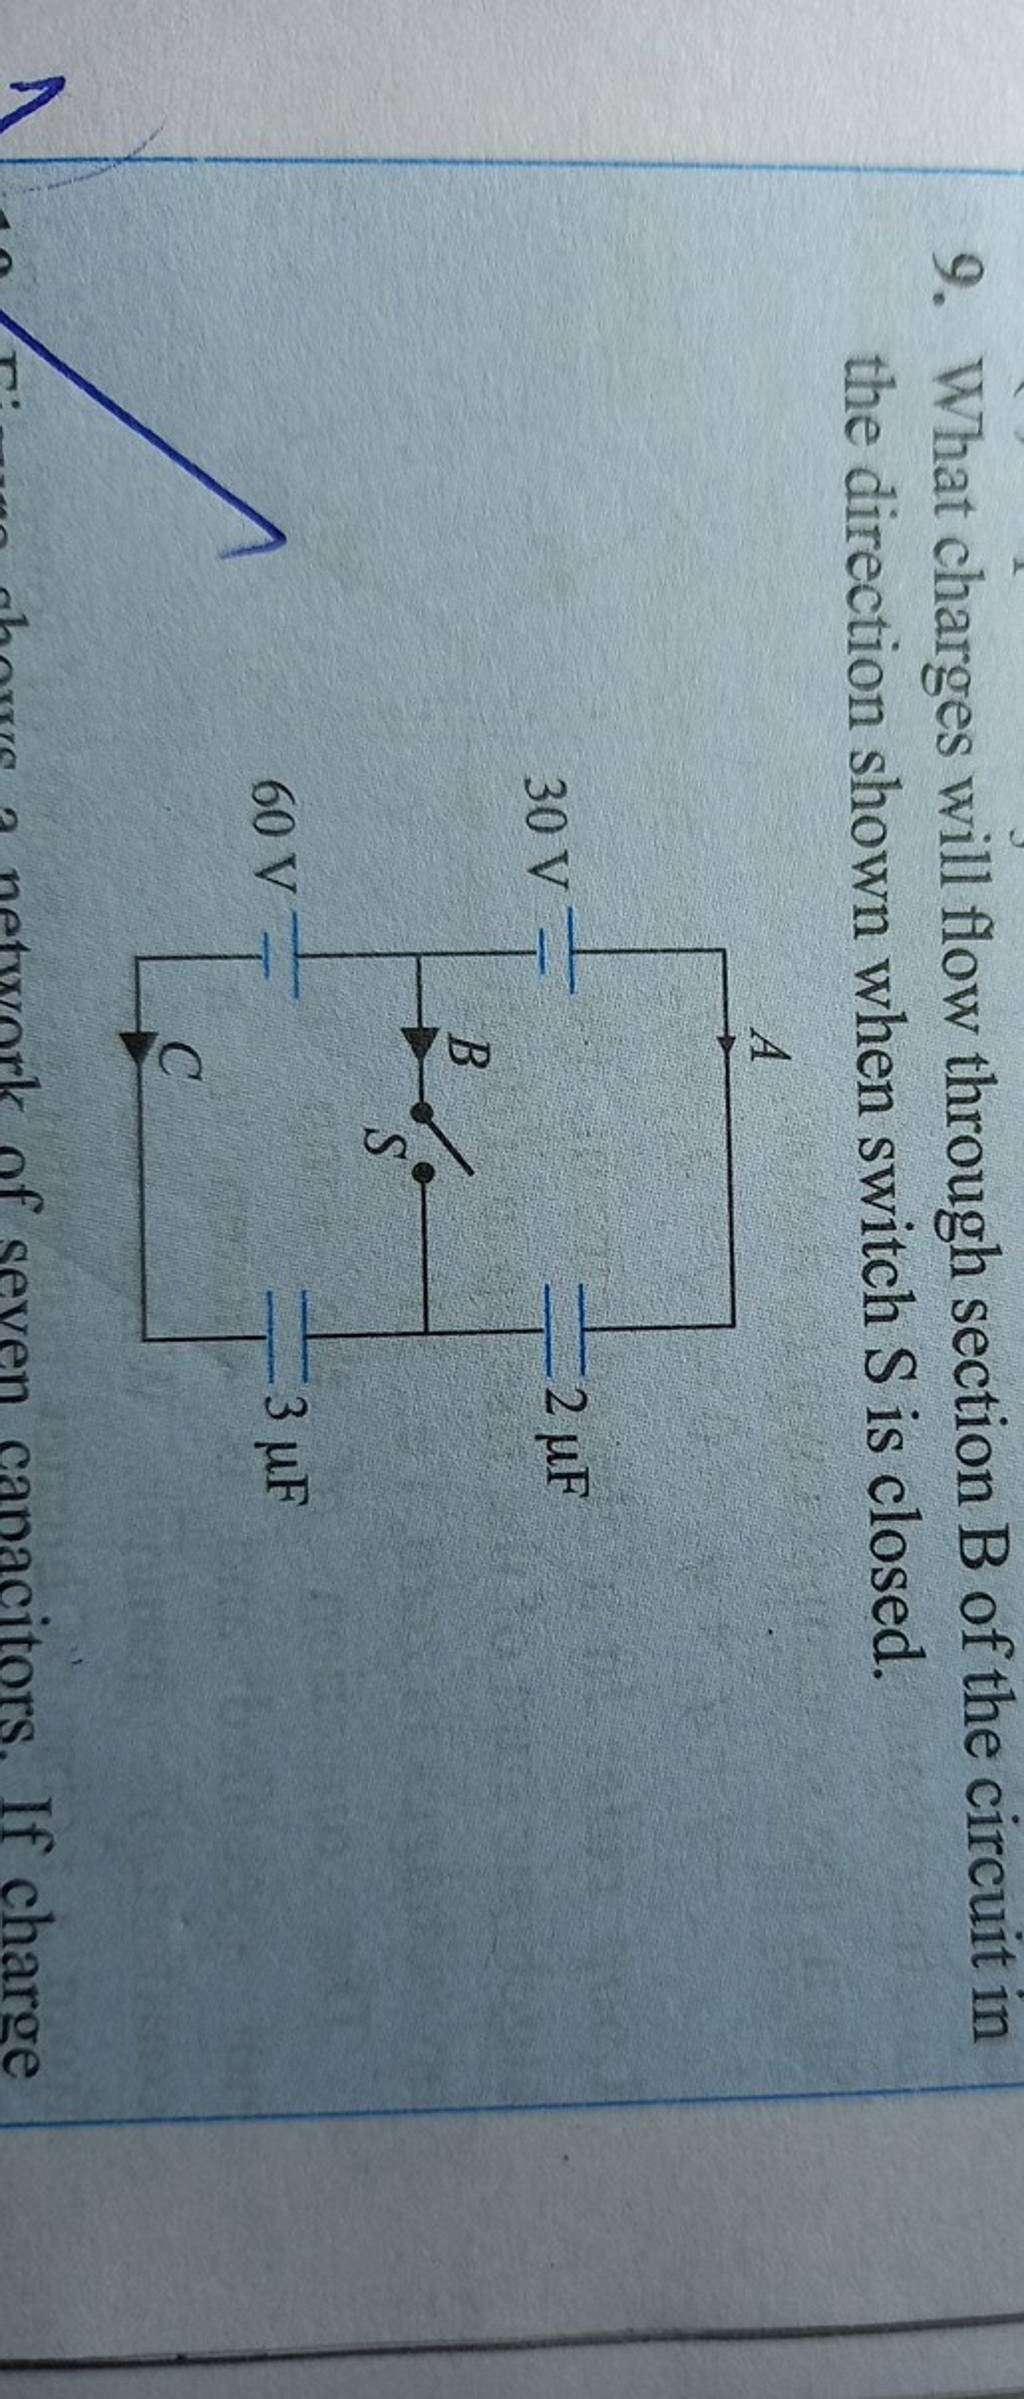 9. What charges will flow through section mathrmB of the circuit in th